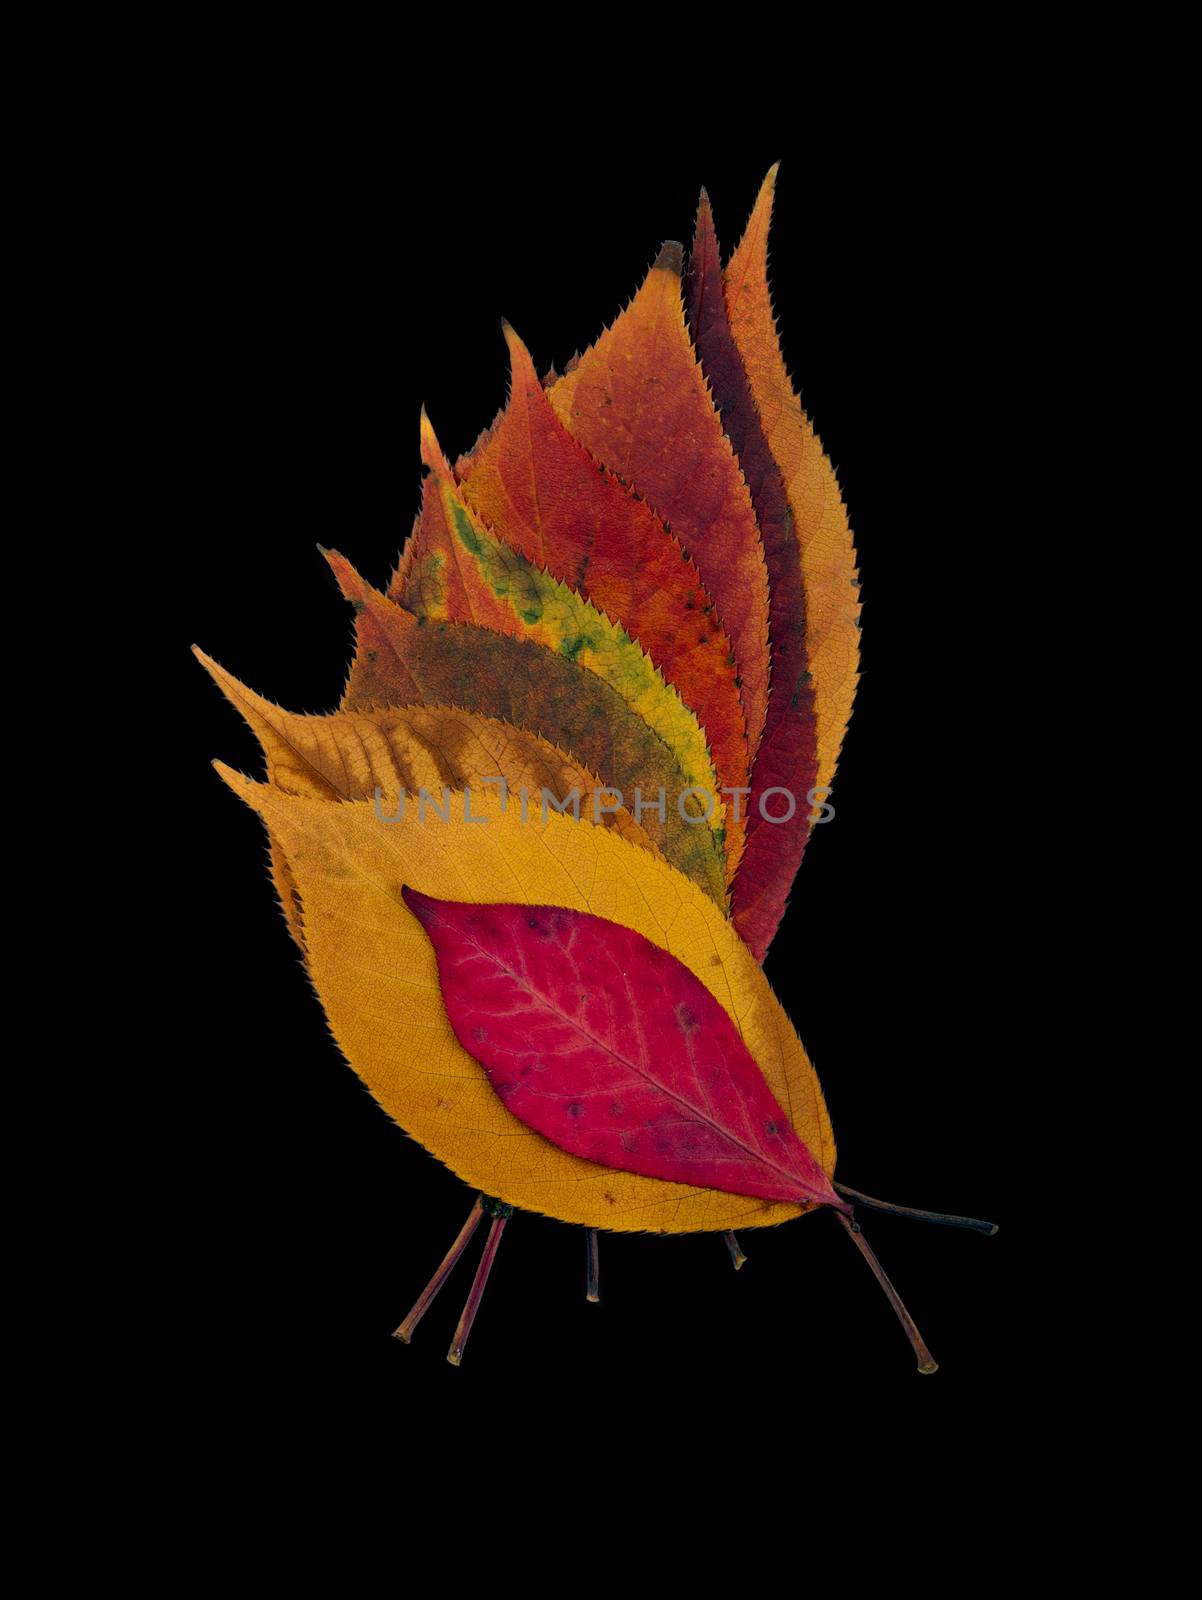 Colorful fall leaves isolated on white.